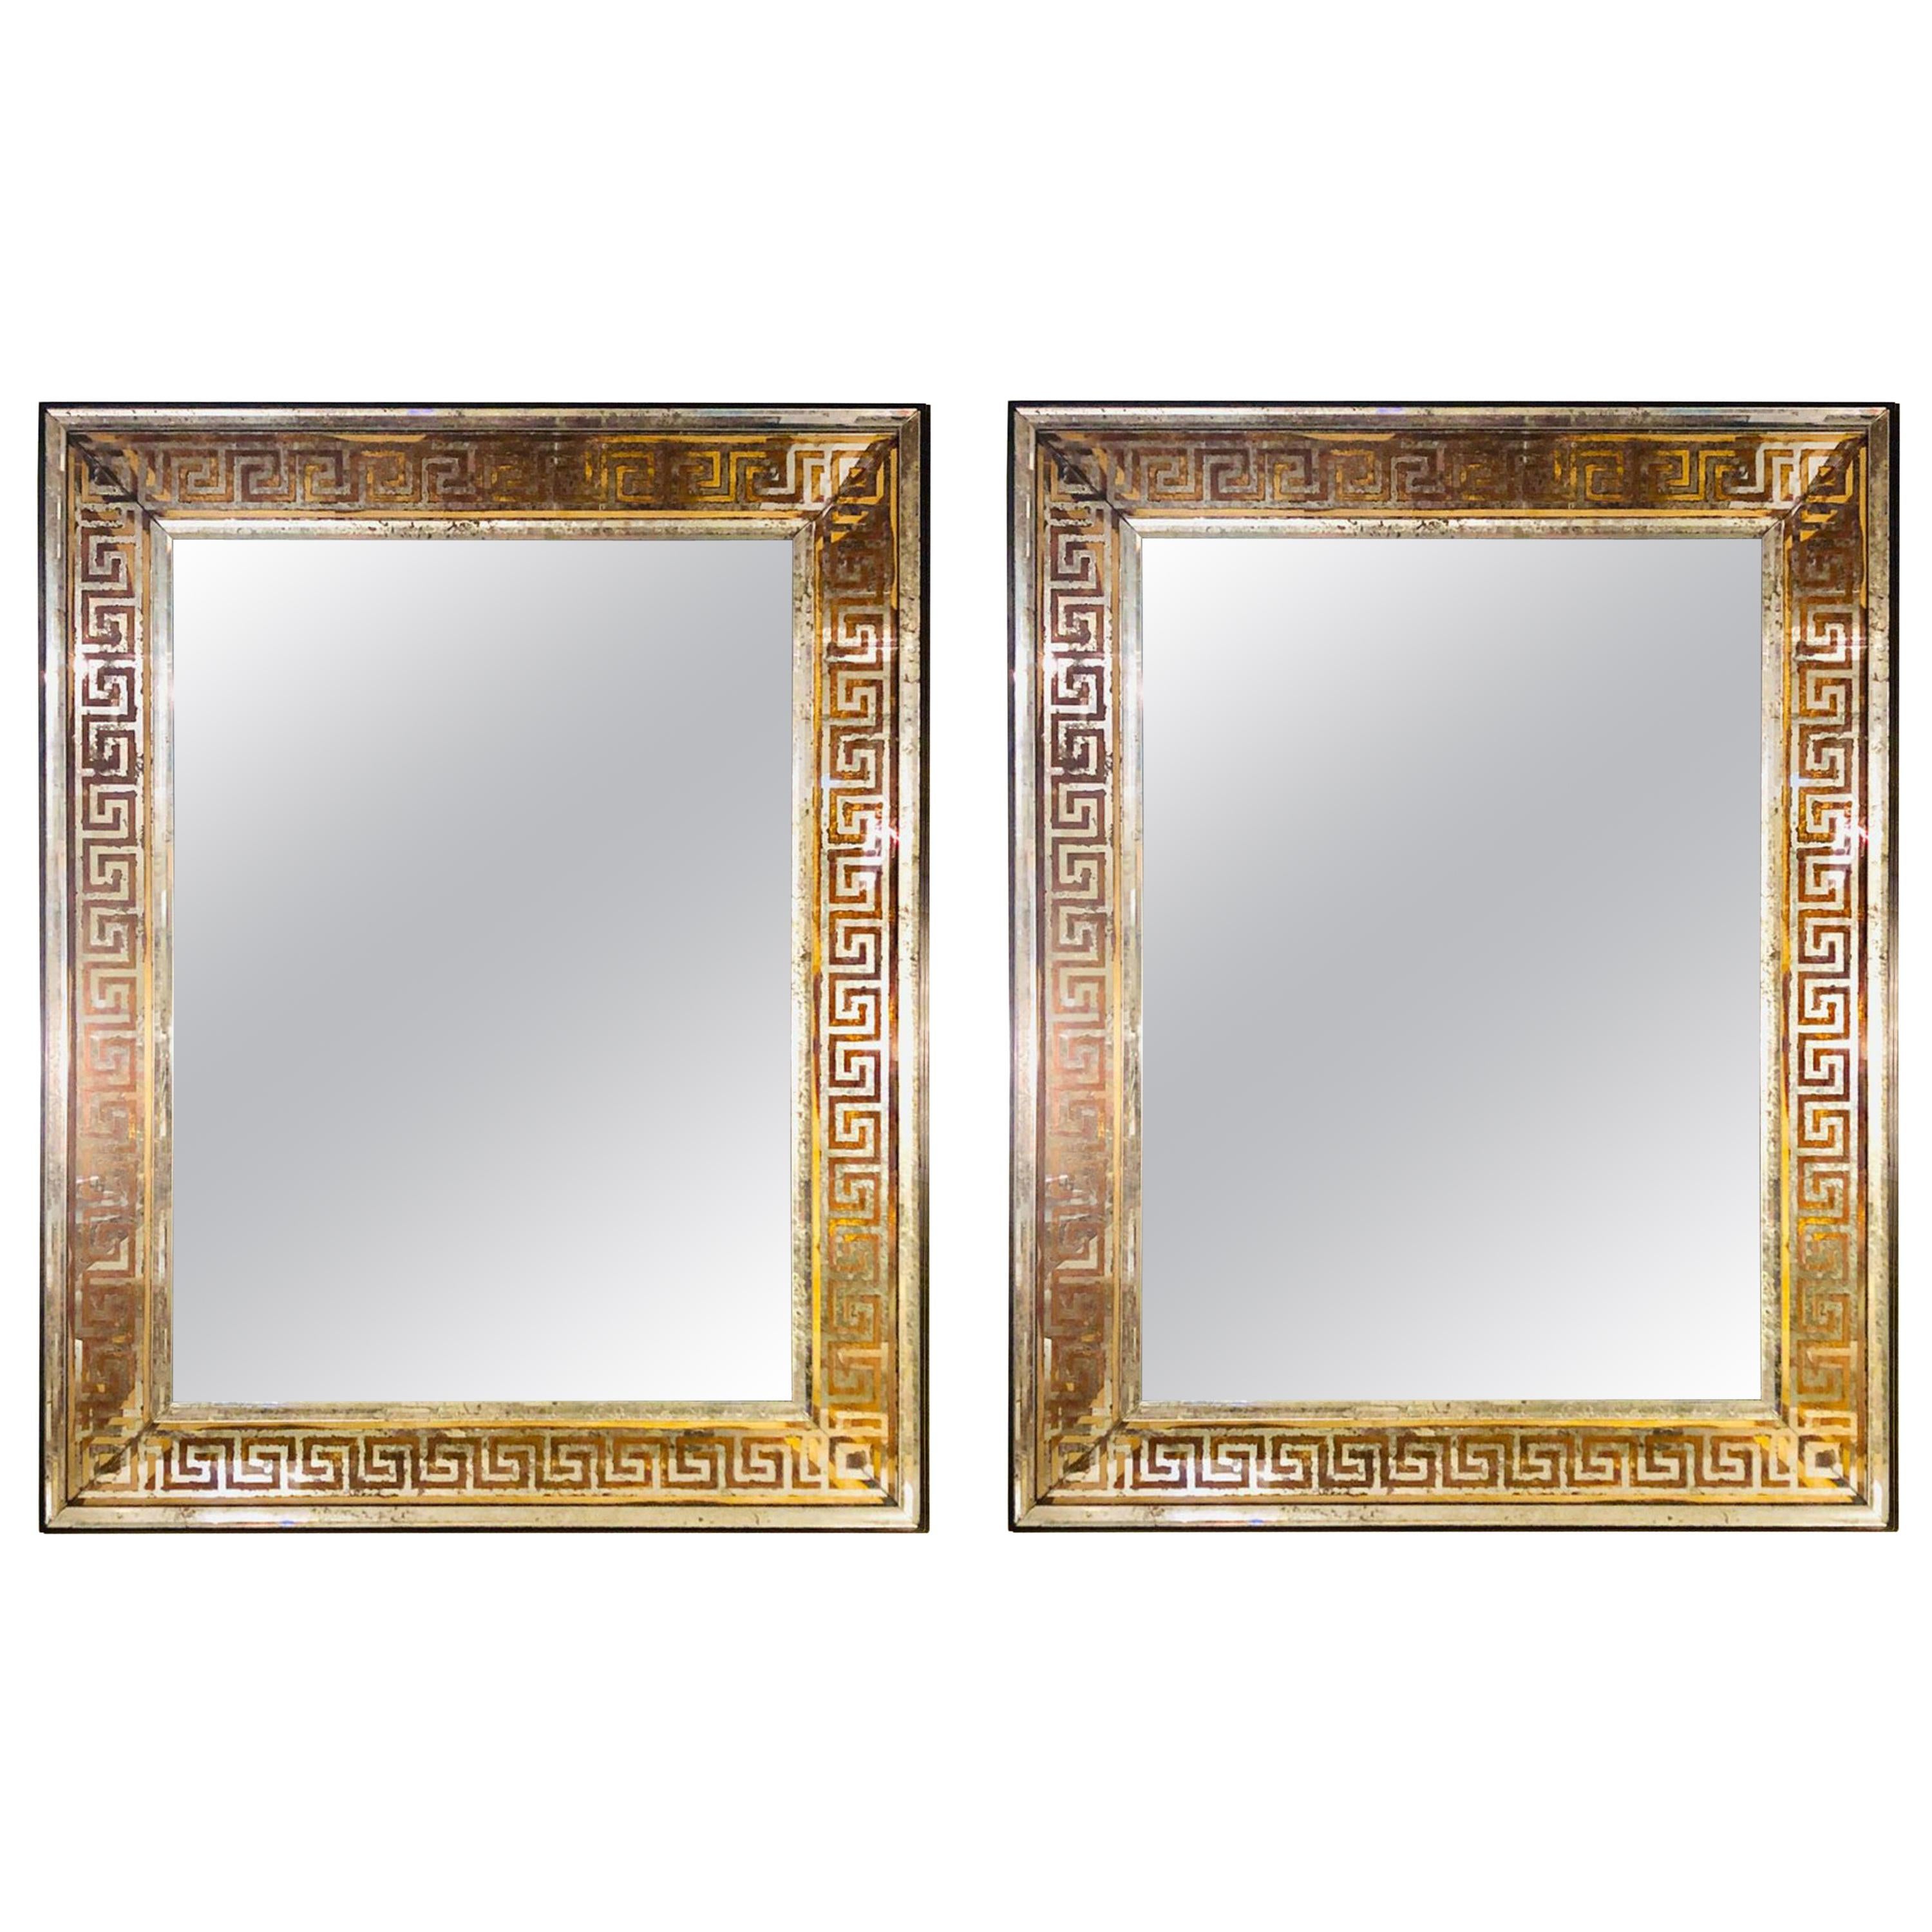 Pair of Monumental Hollywood Regency Style Etched Greek Key Wall Mirrors